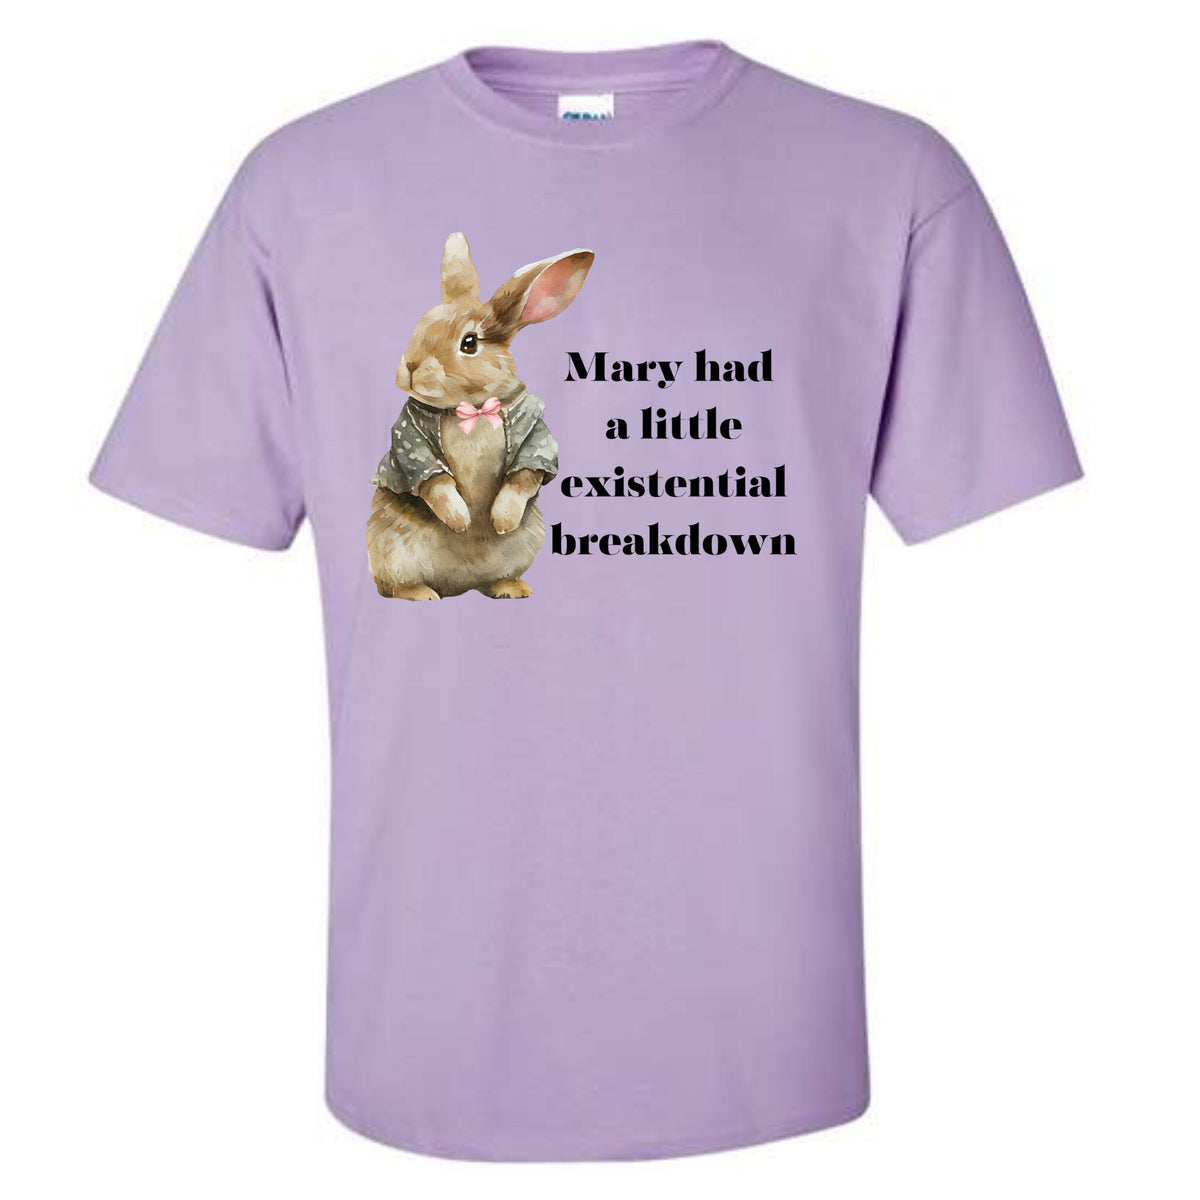 Mary Had a Little Existential Breakdown T-Shirt or Crewneck  Sweatshirt